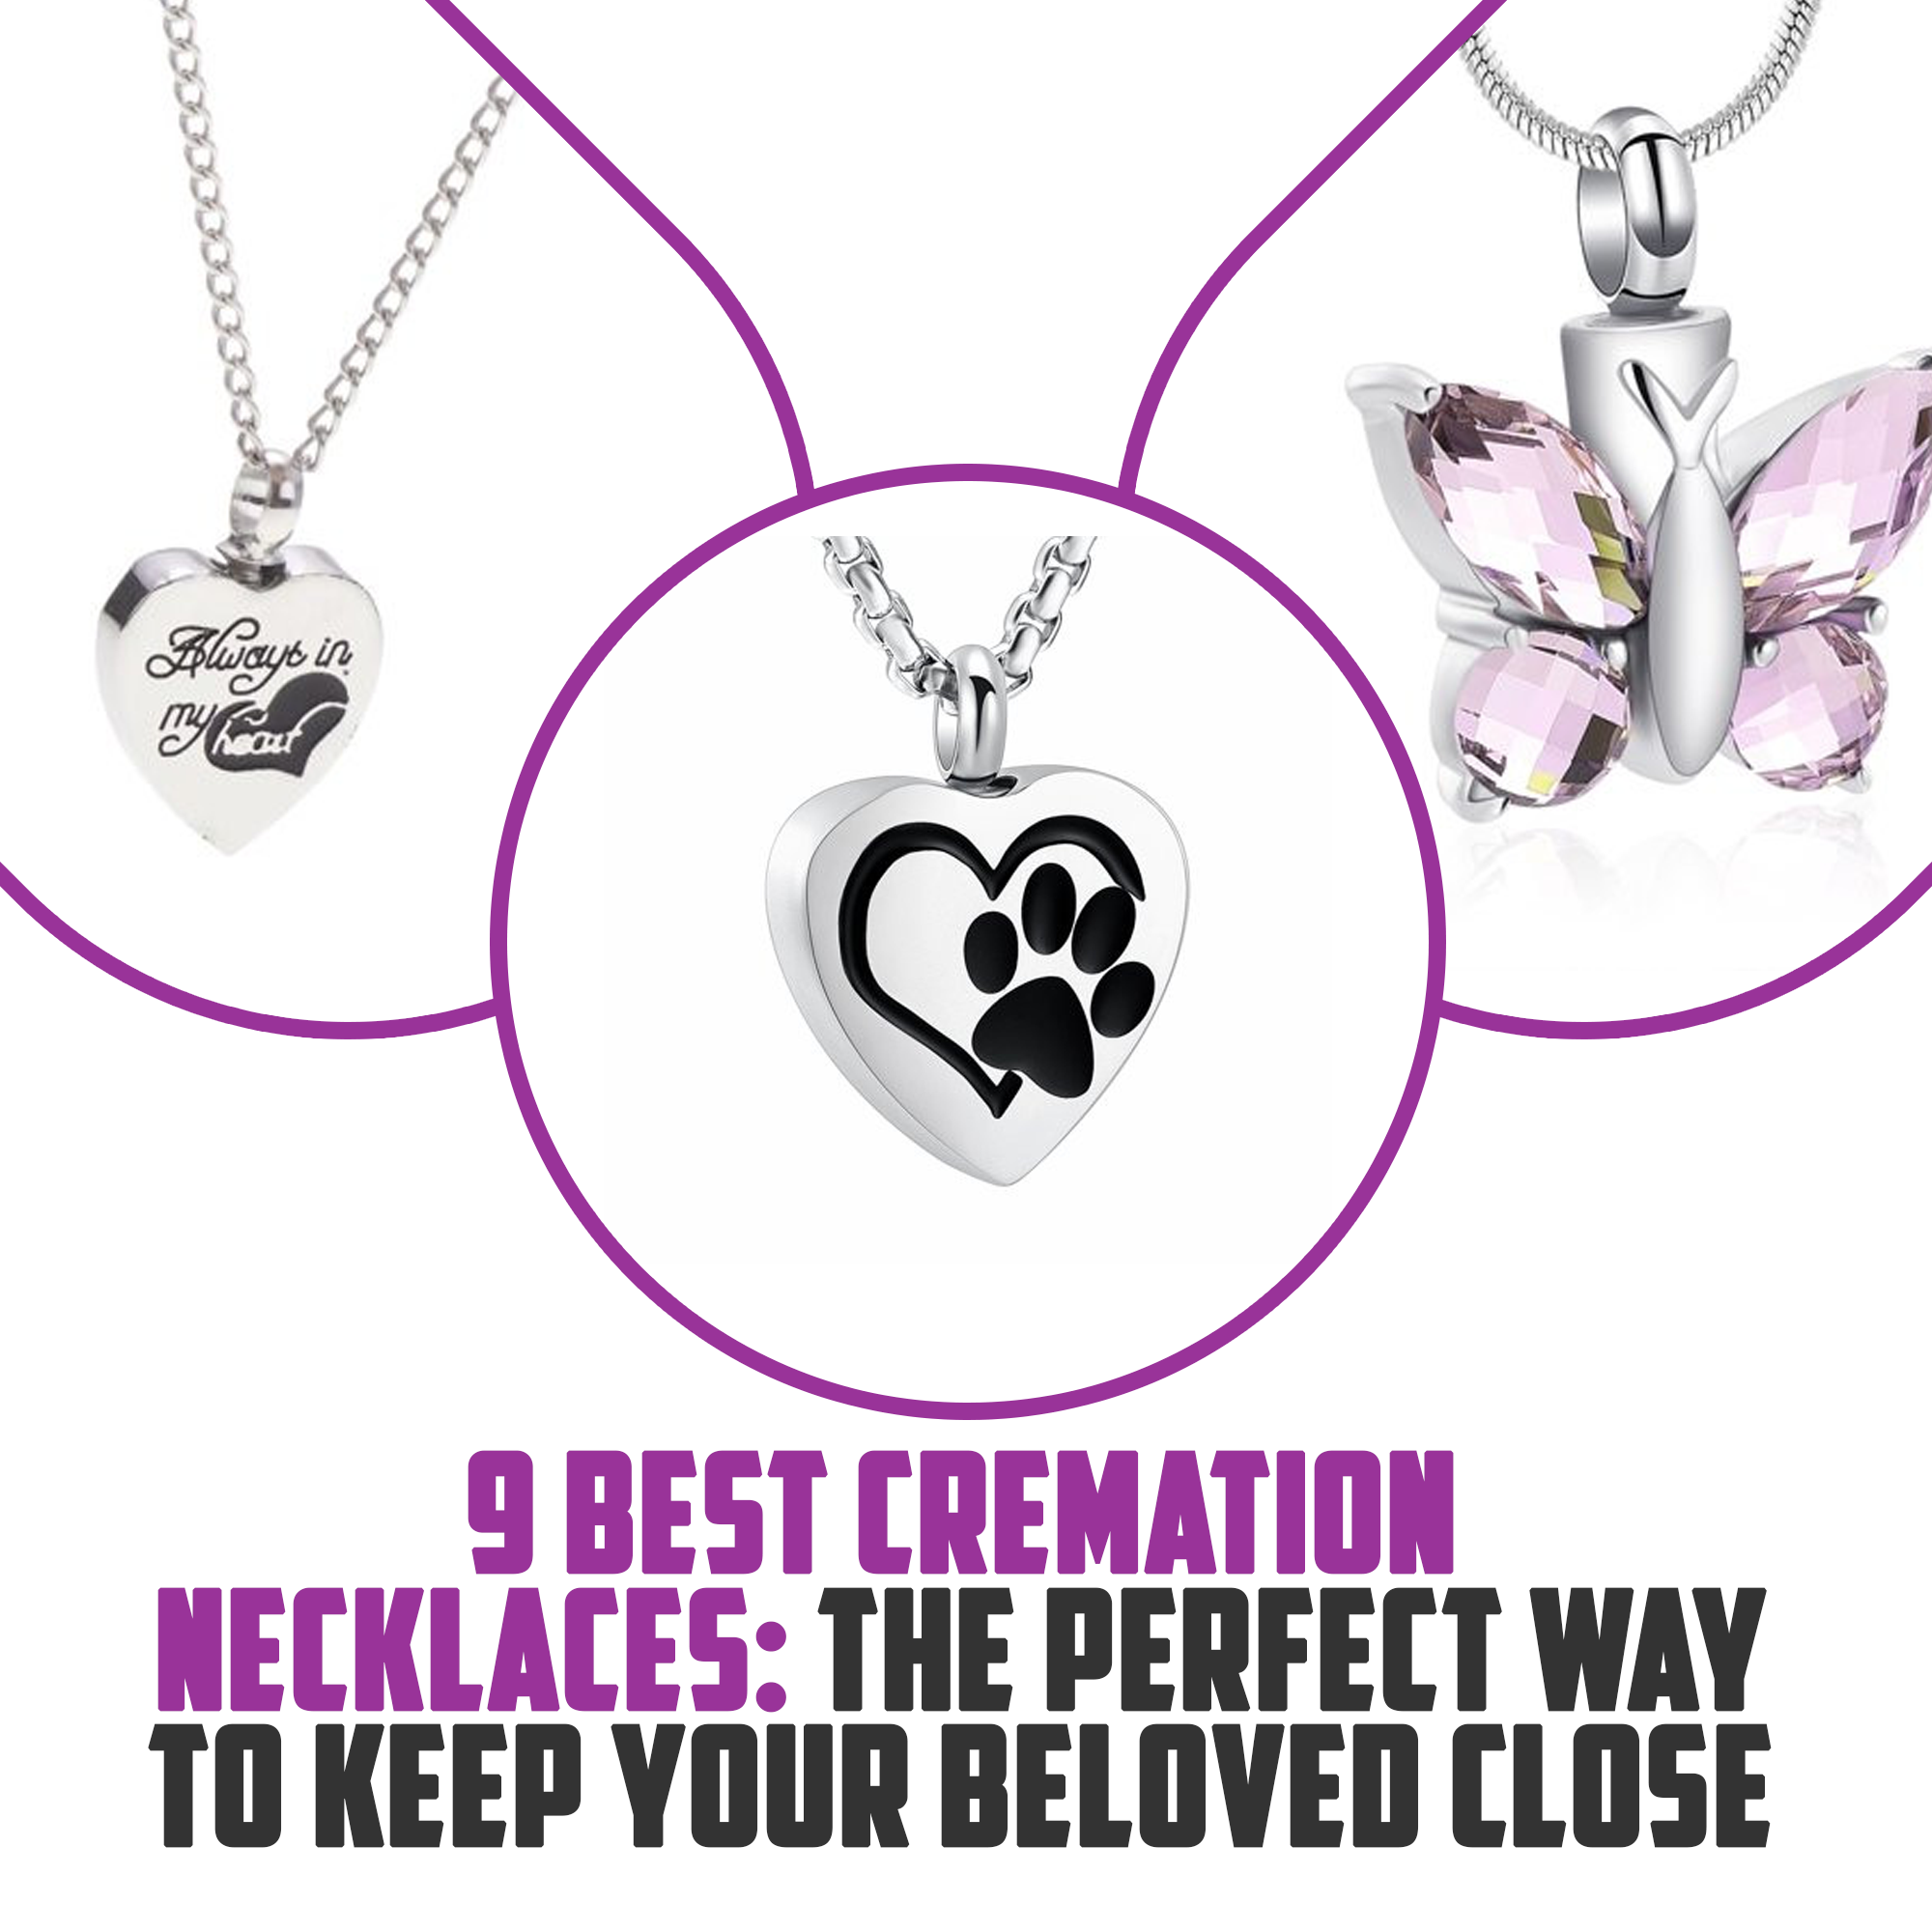 9 Best Cremation Necklaces: The Perfect Way To Keep Your Beloved Close